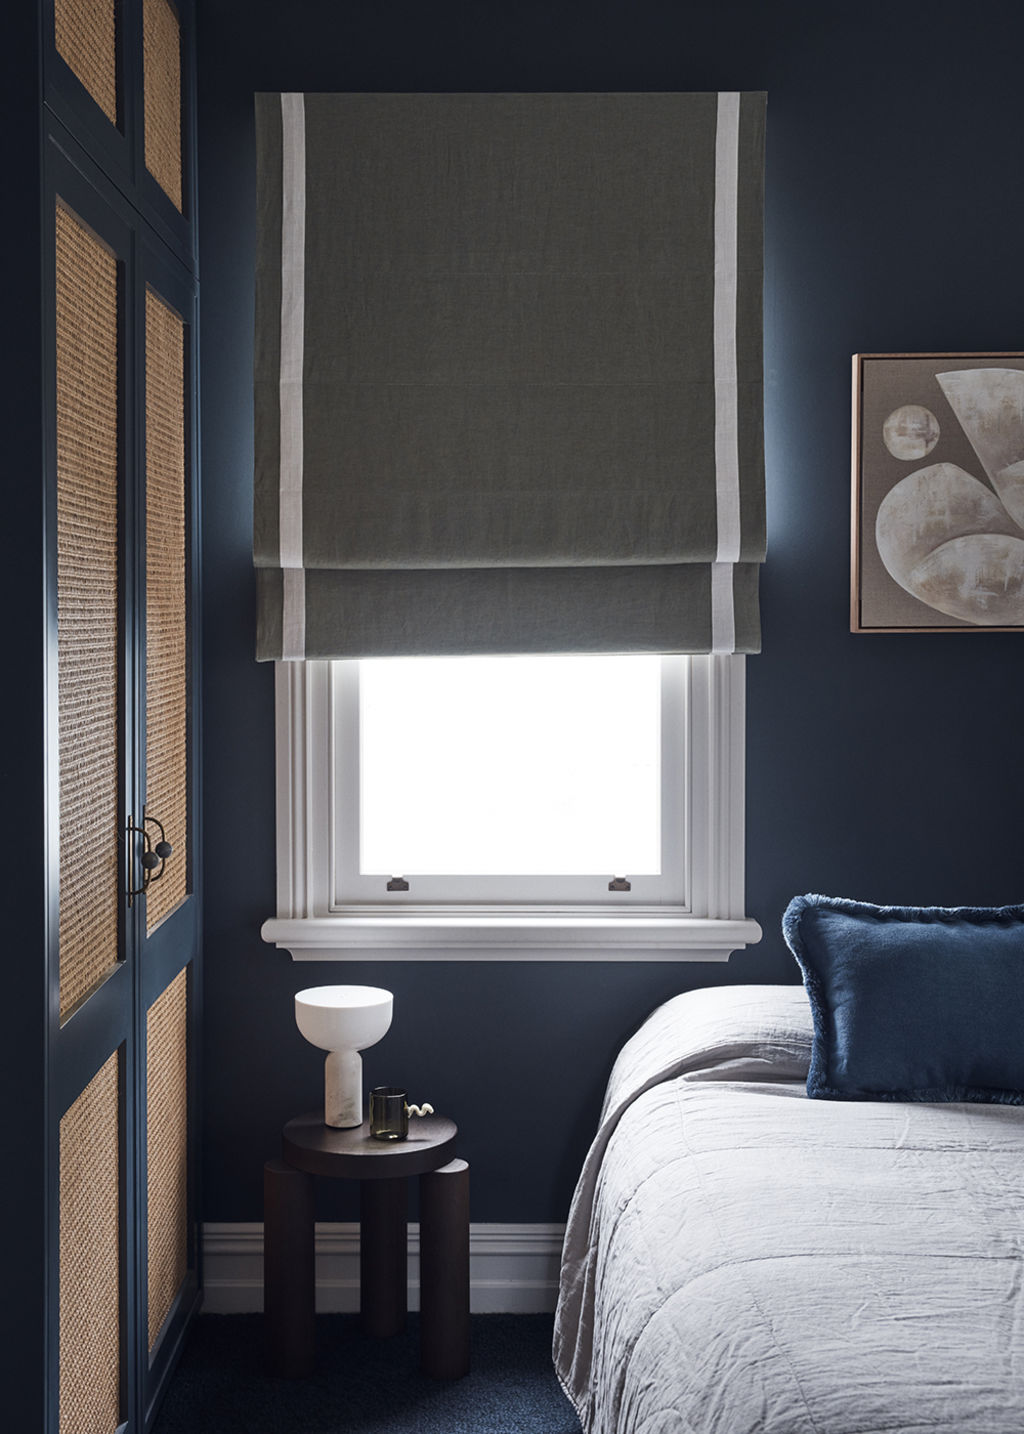 Deeper tones of blue have been used in the bedroom. Photo: Damian Bennett